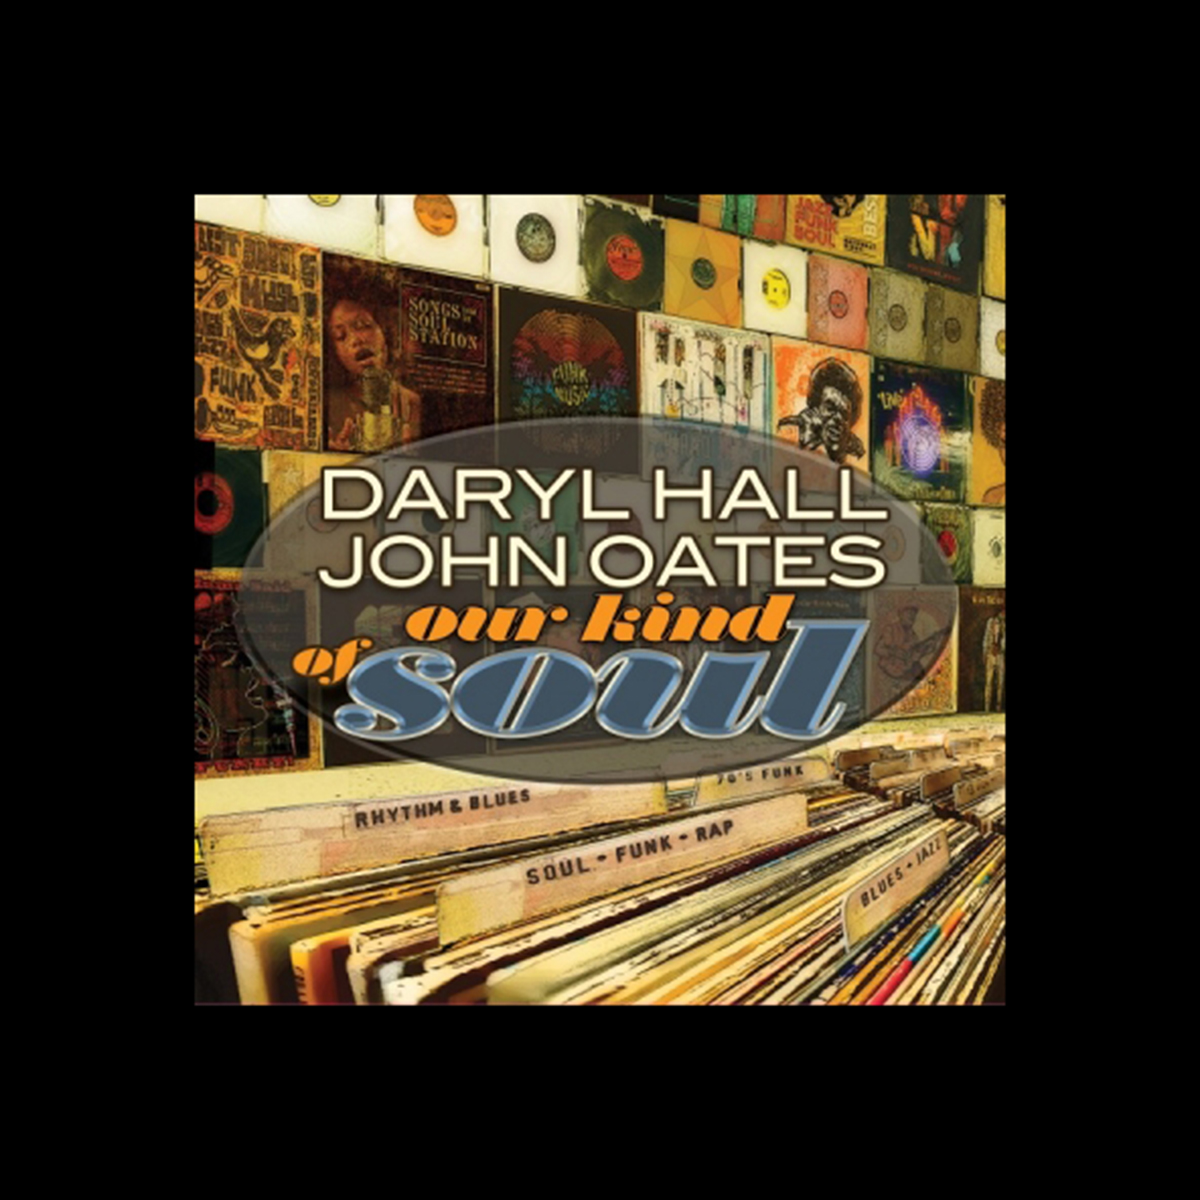 New Vinyl Release: The First-Ever Vinyl Release of Daryl Hall & John Oates’ Top 5 Charting LP, ‘Our Kind Of Soul’